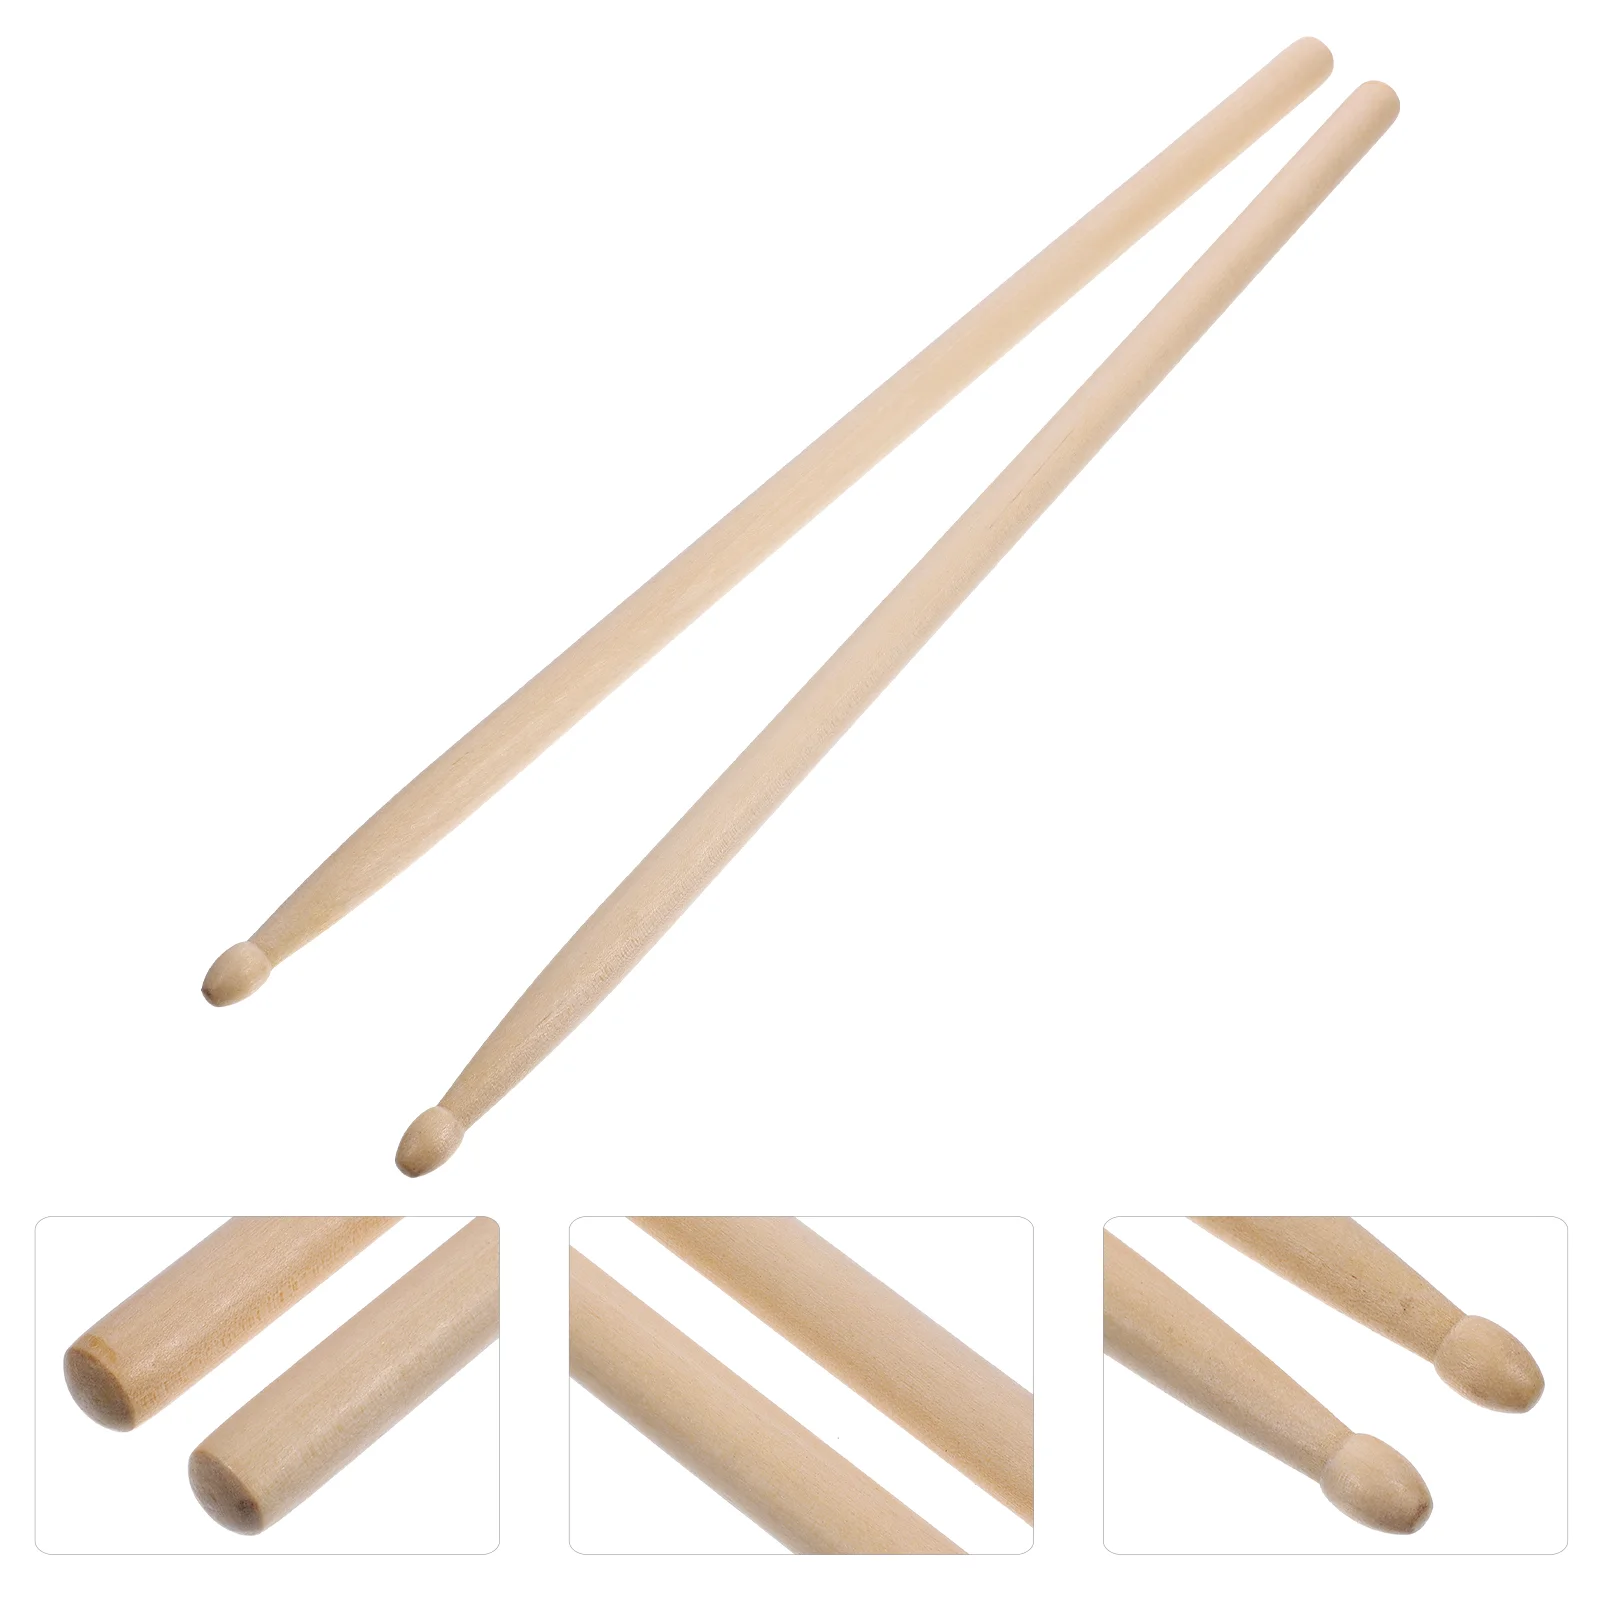 

6 Pairs Music Instruments 5A Maple Drumstick Sticks Bulk Drumsticks For Practice Exercise Musical Percussion Accessories